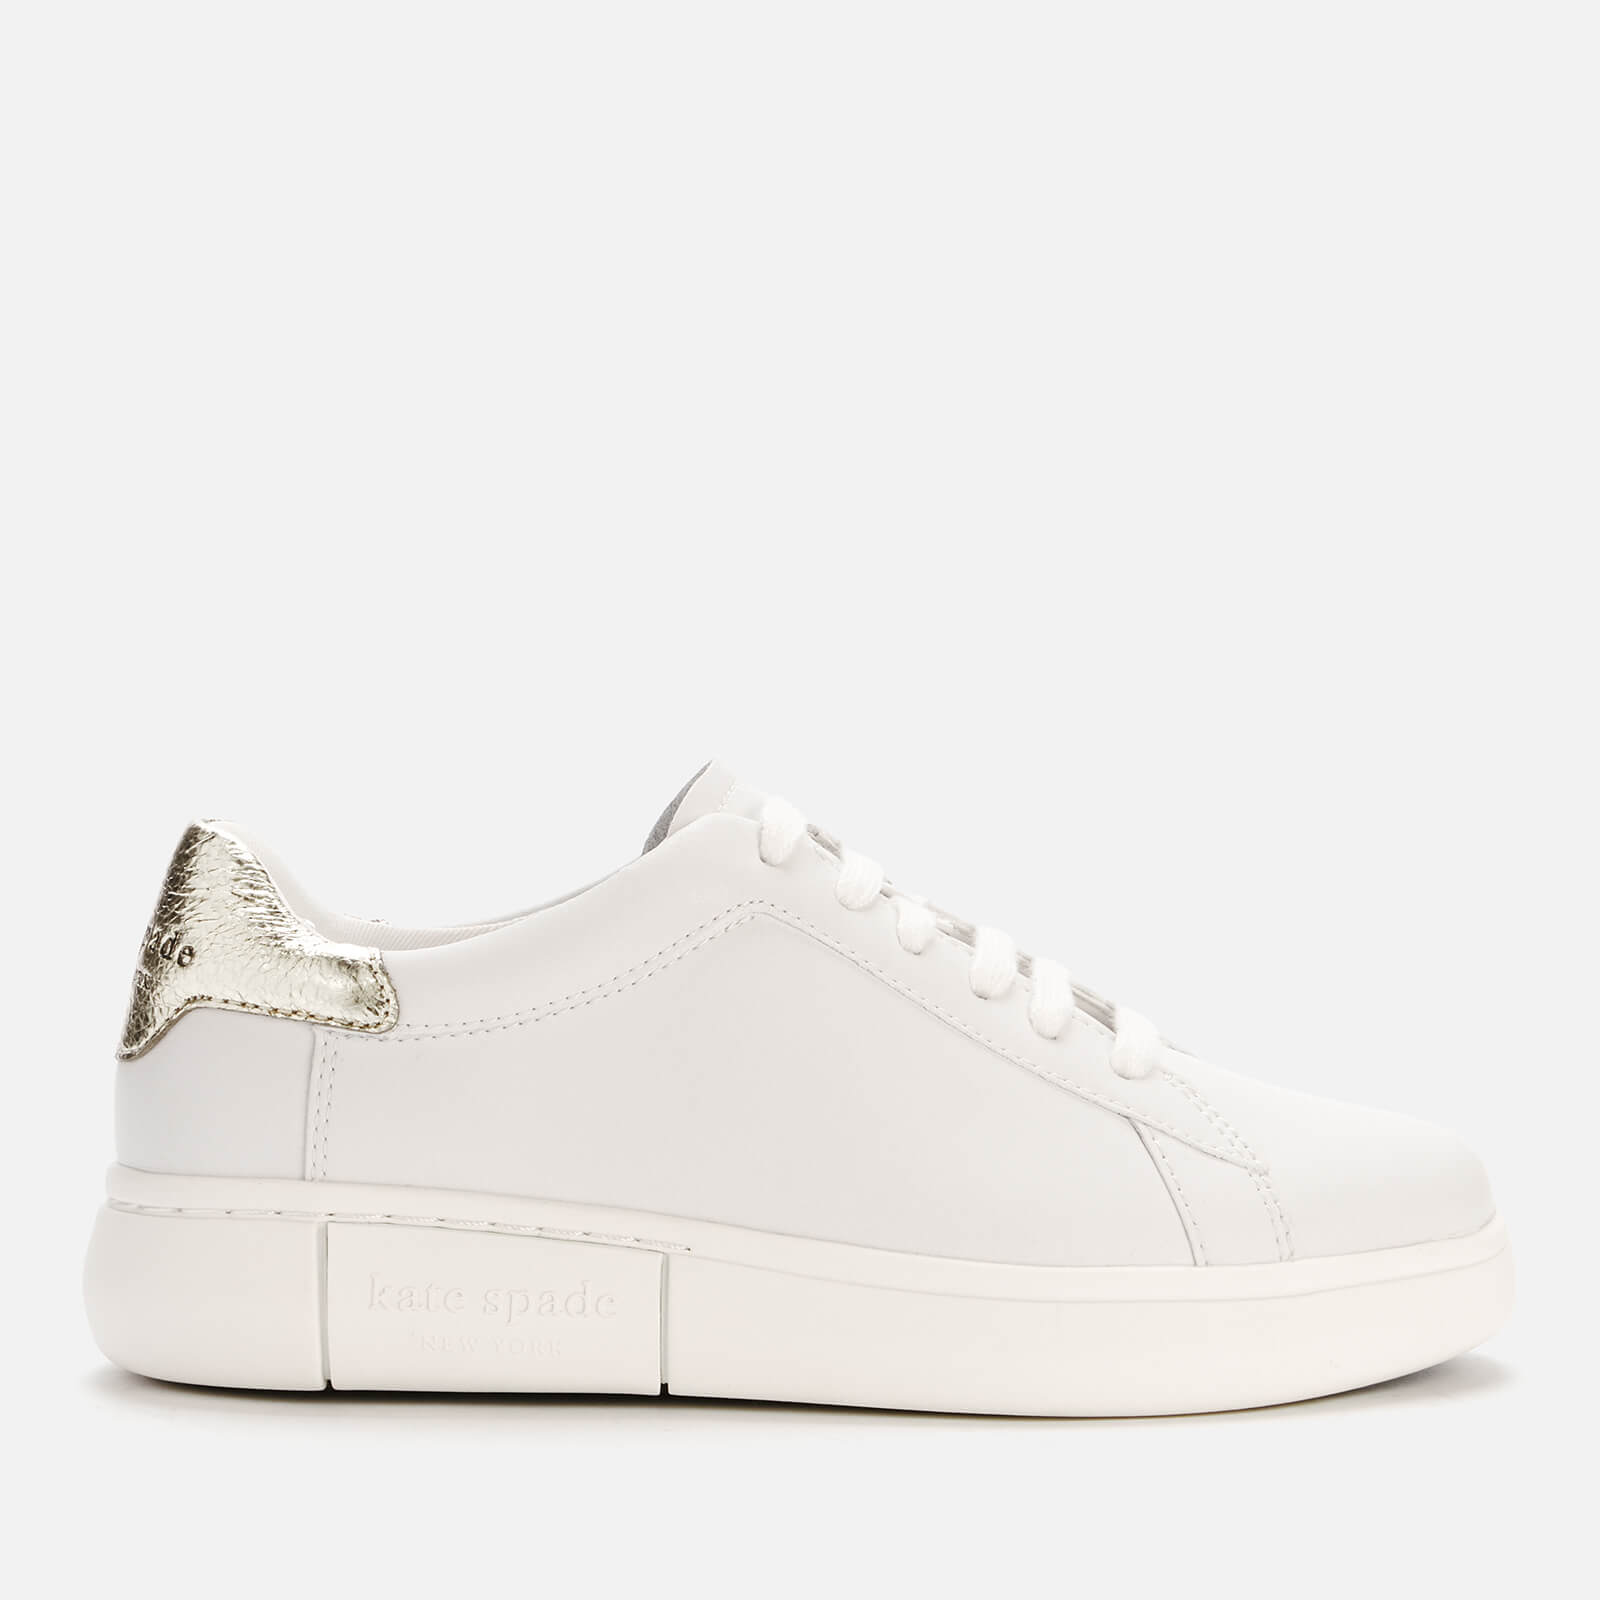 Kate Spade New York Women's Lift Leather Cupsole Trainers - Optic White/Pale Gold - UK 4 von kate spade new york